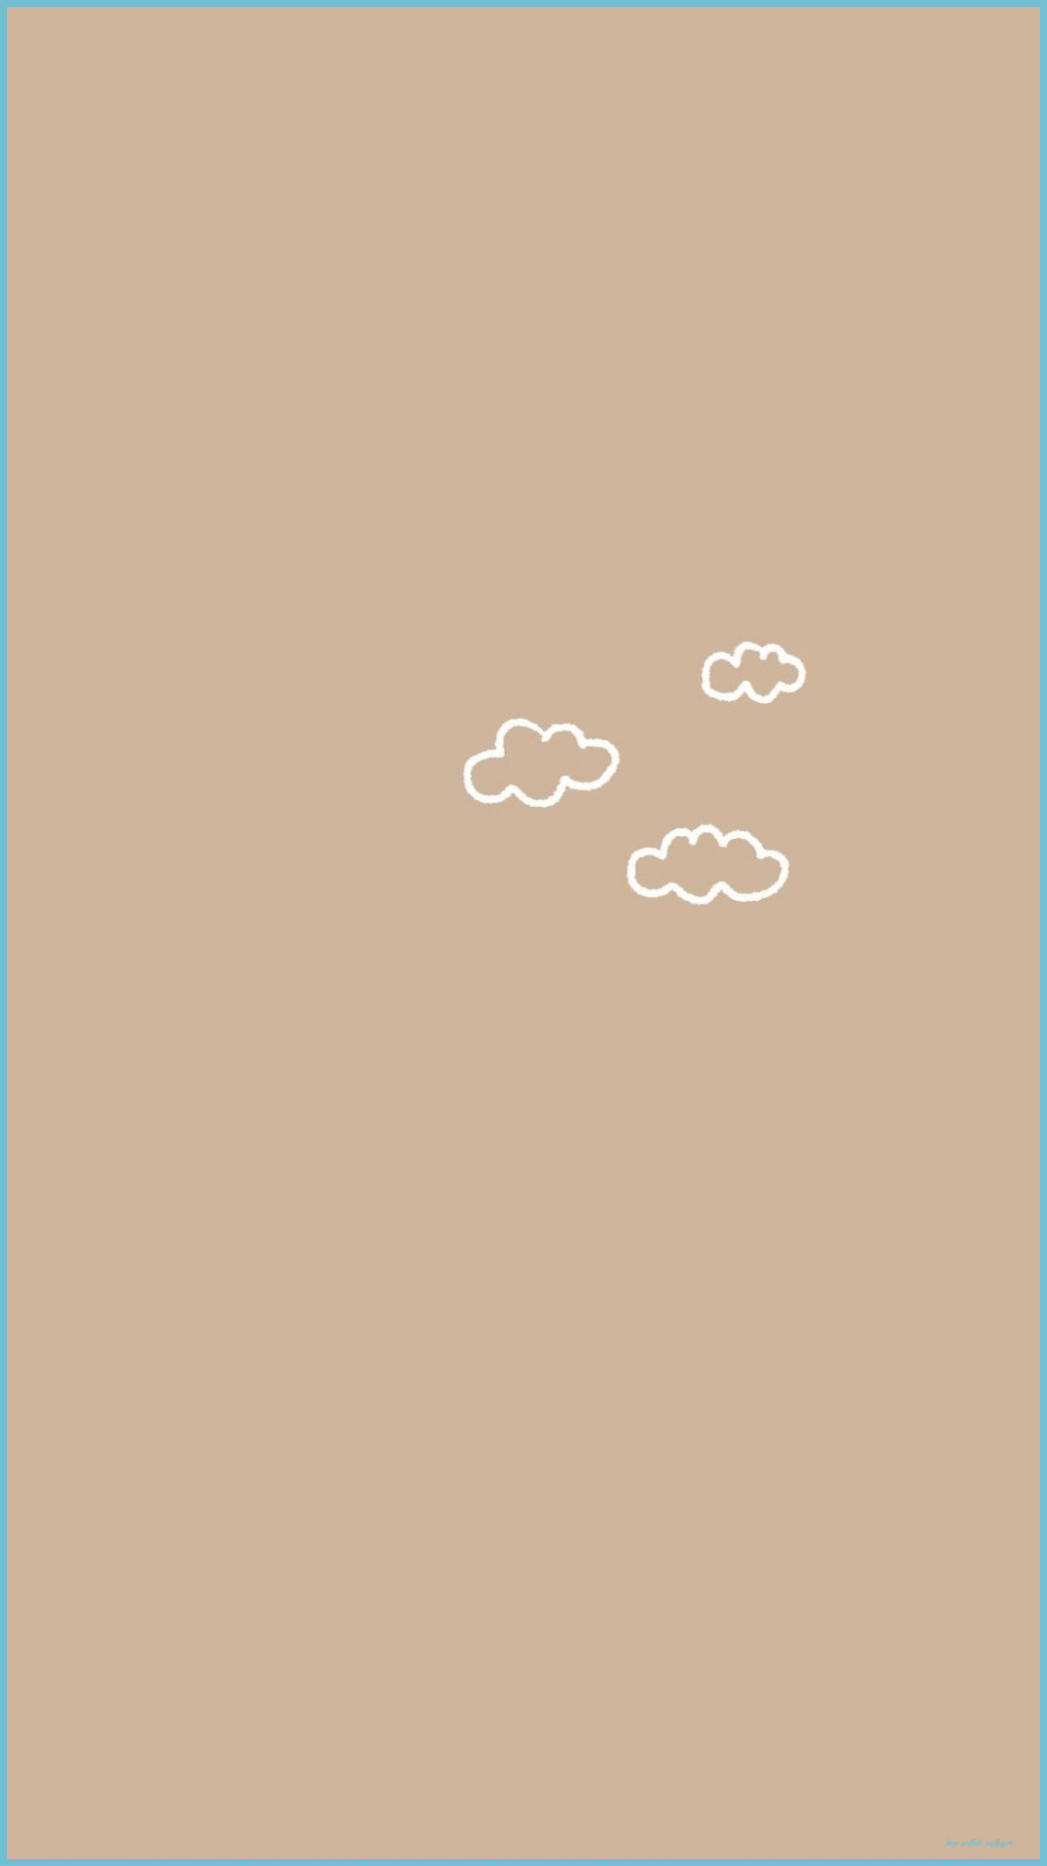 White Clouds On Beige Brown Aesthetic Background